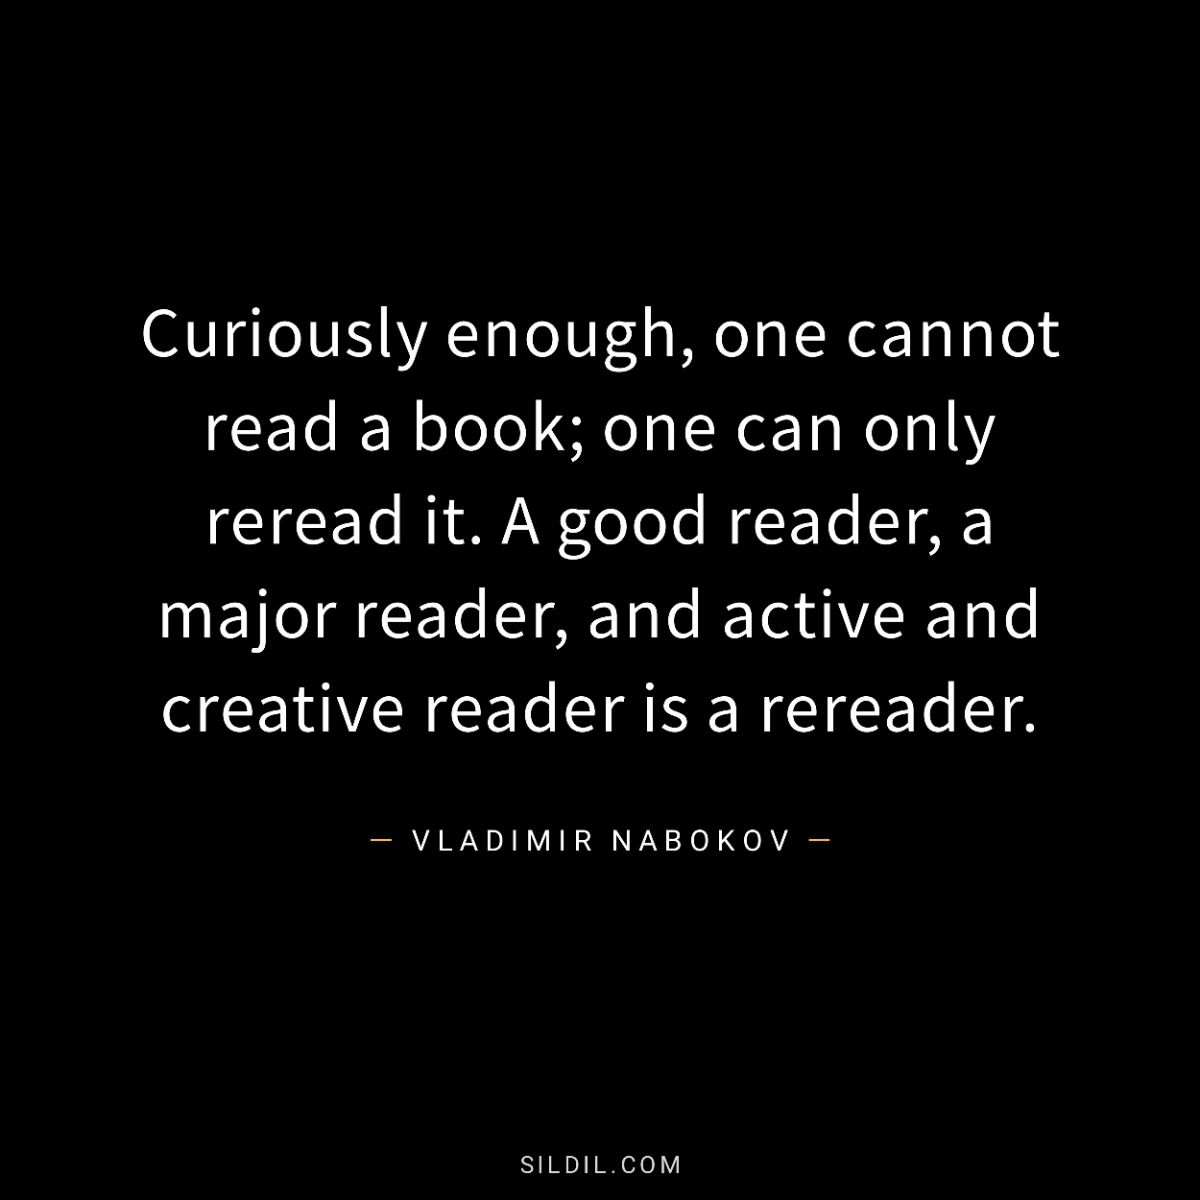 Curiously enough, one cannot read a book; one can only reread it. A good reader, a major reader, and active and creative reader is a rereader.